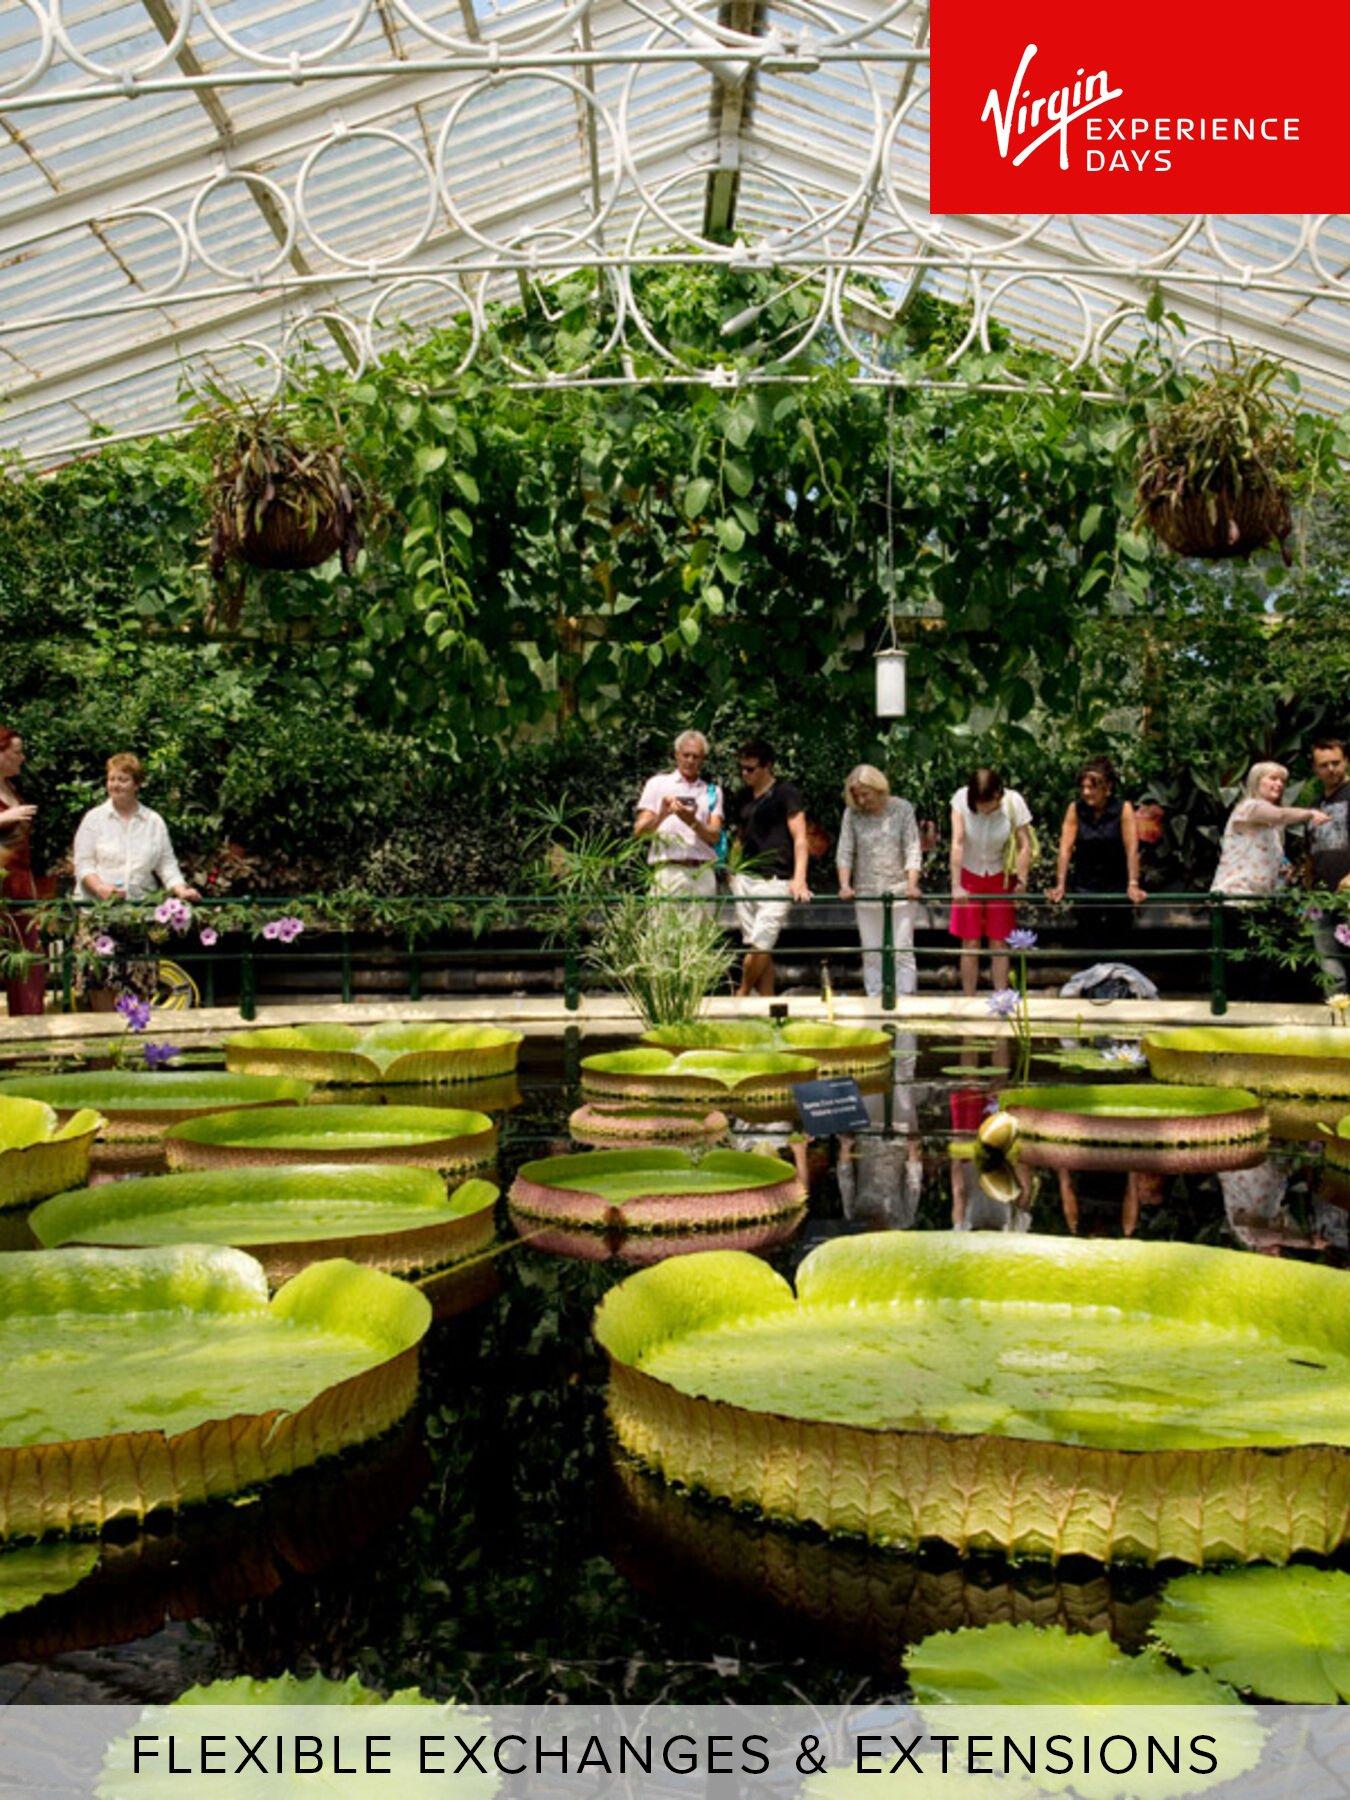 Virgin Experience Days Visit To Kew Gardens And Palace London For